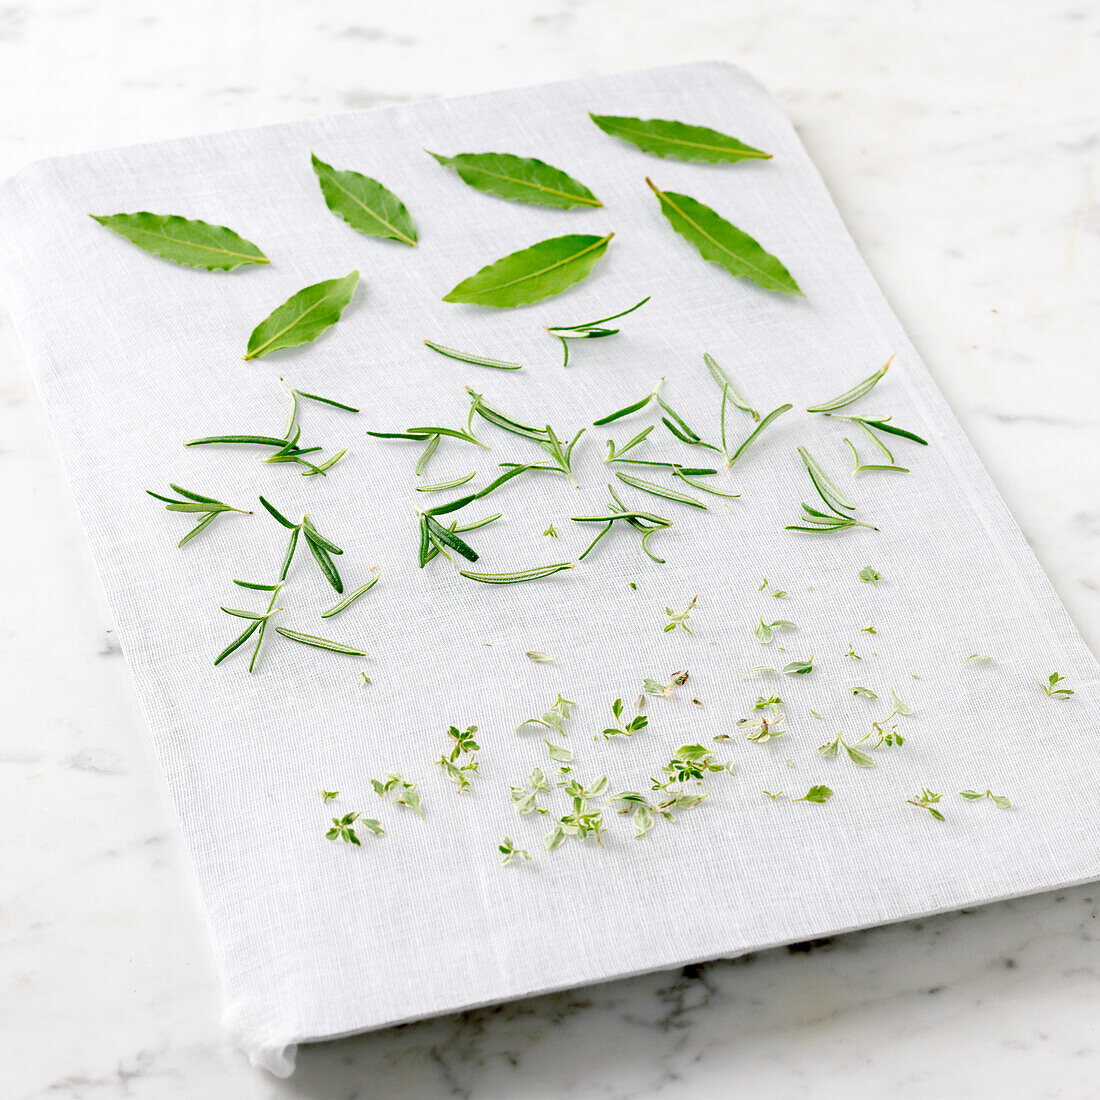 Herbs placed on muslin to dry